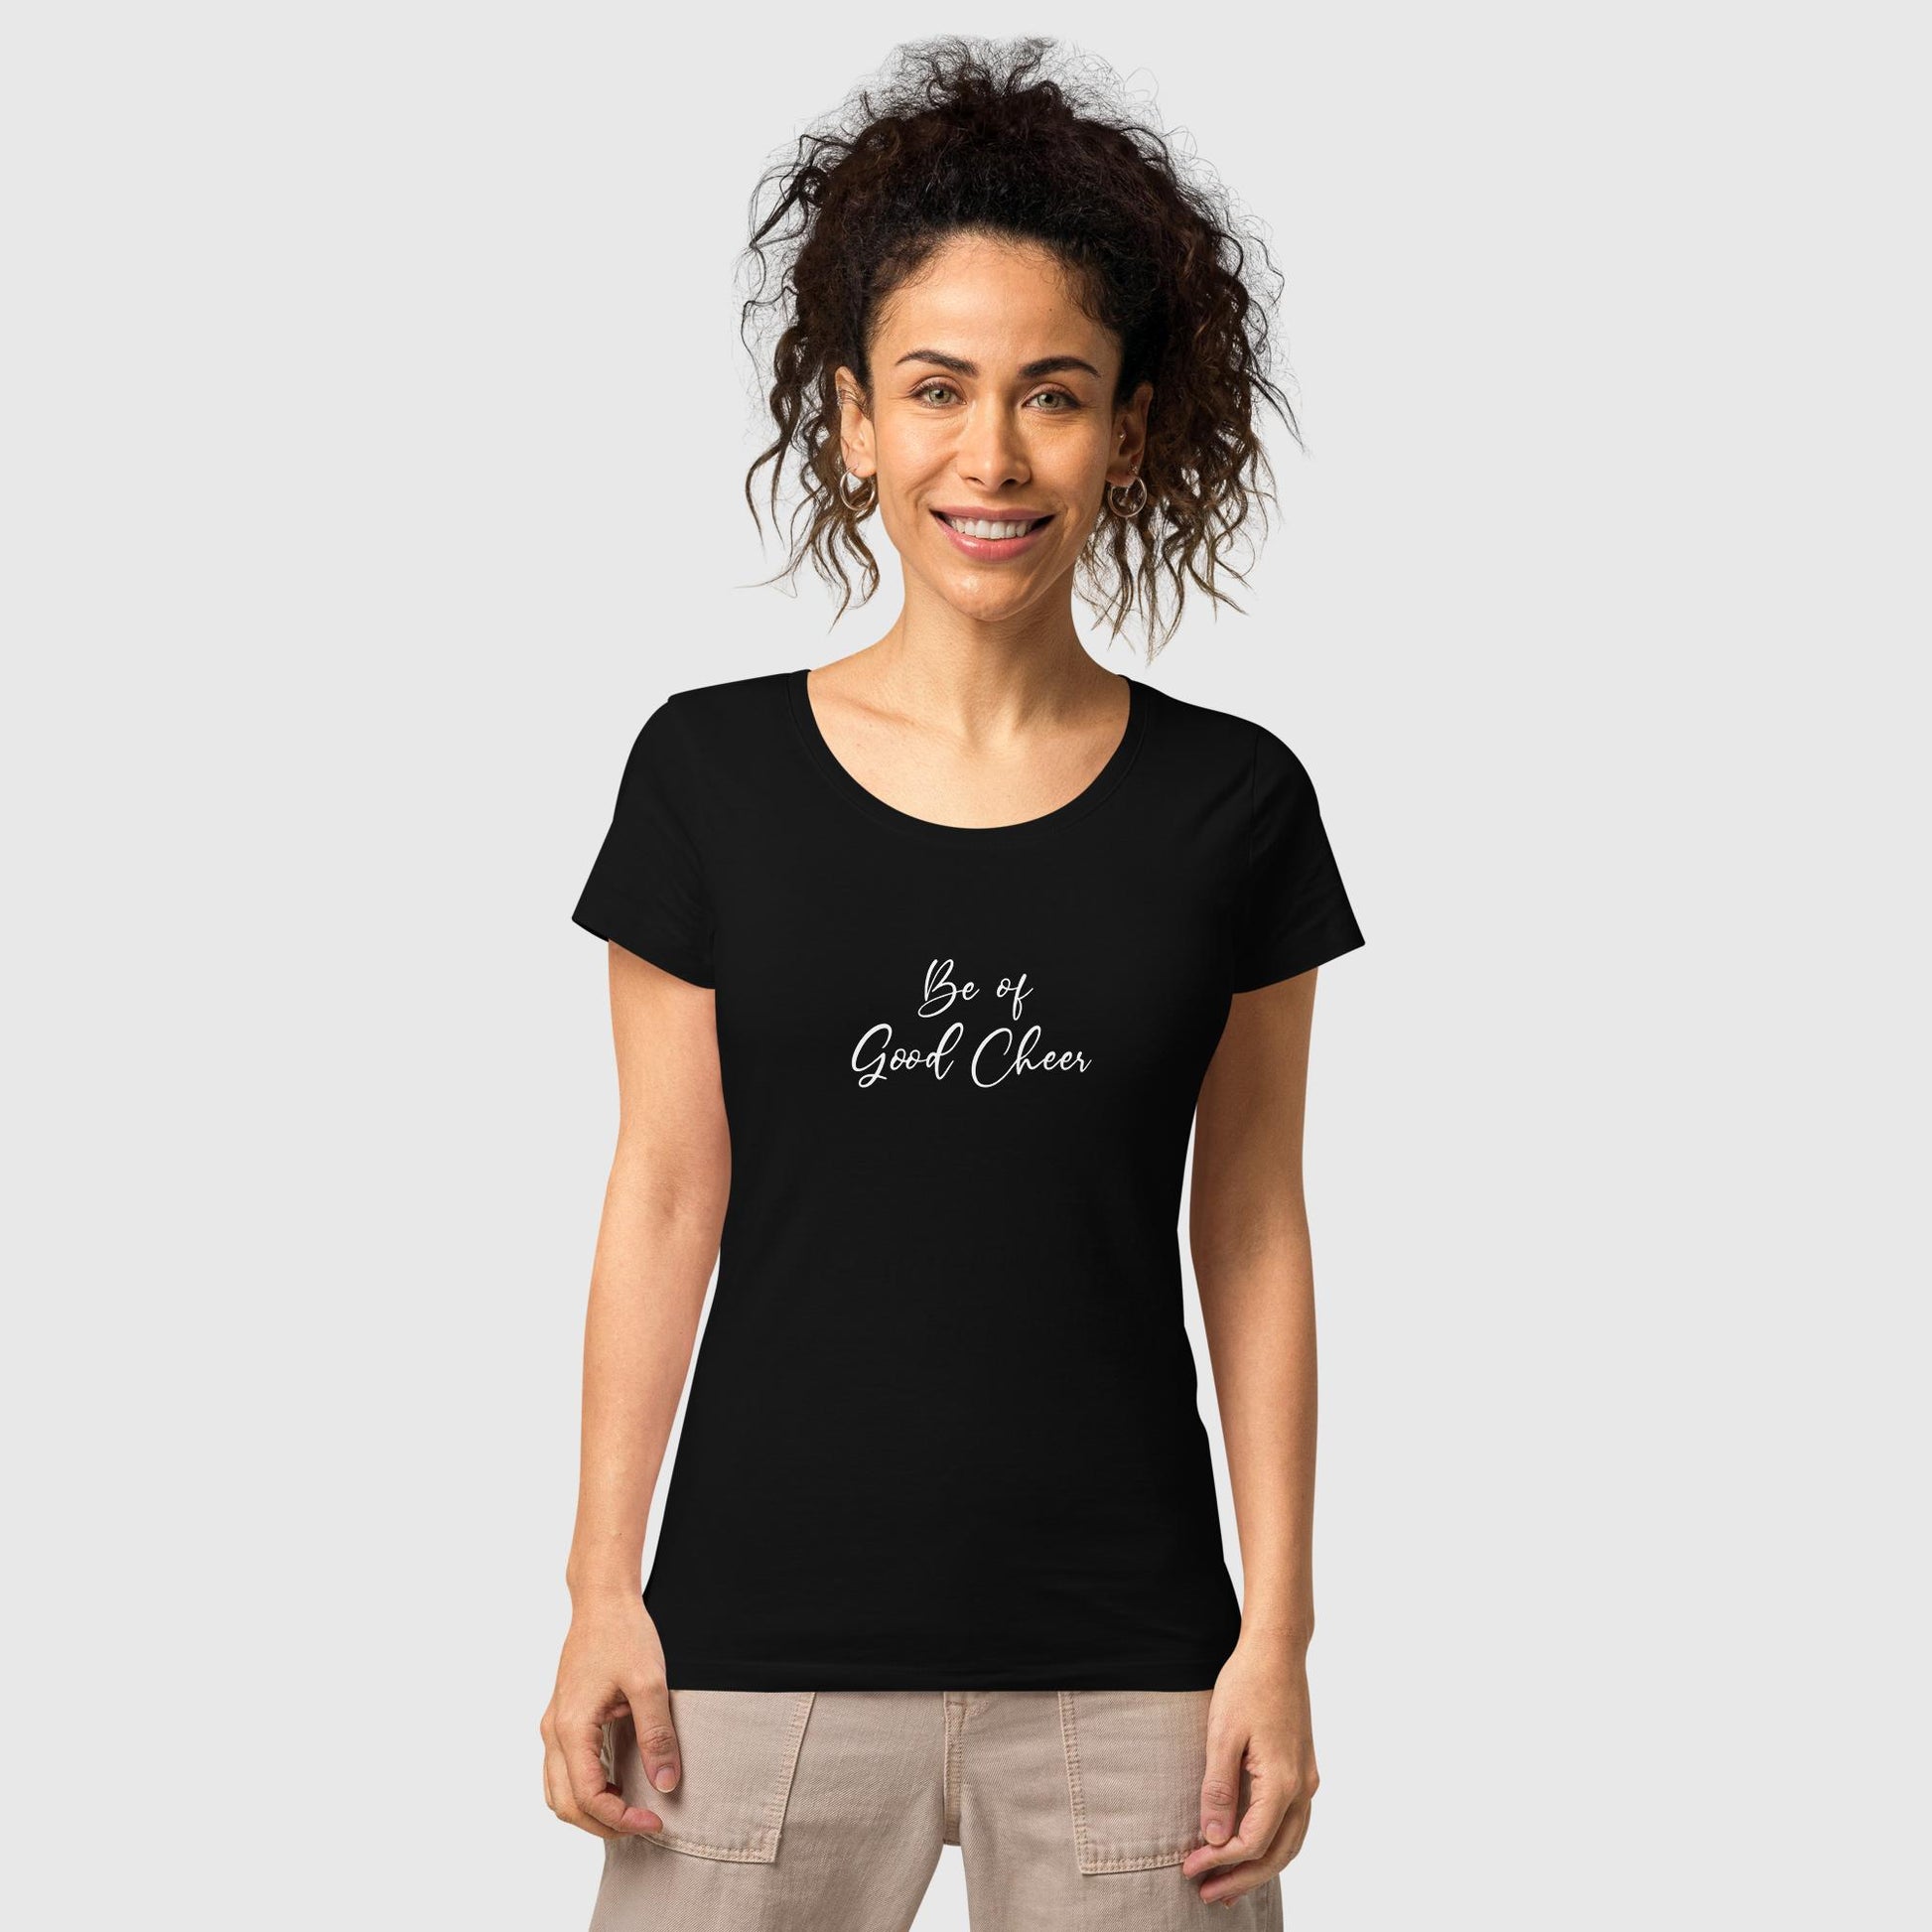 Women's black organic cotton t-shirt that features the positive quote, "Be of Good Cheer."